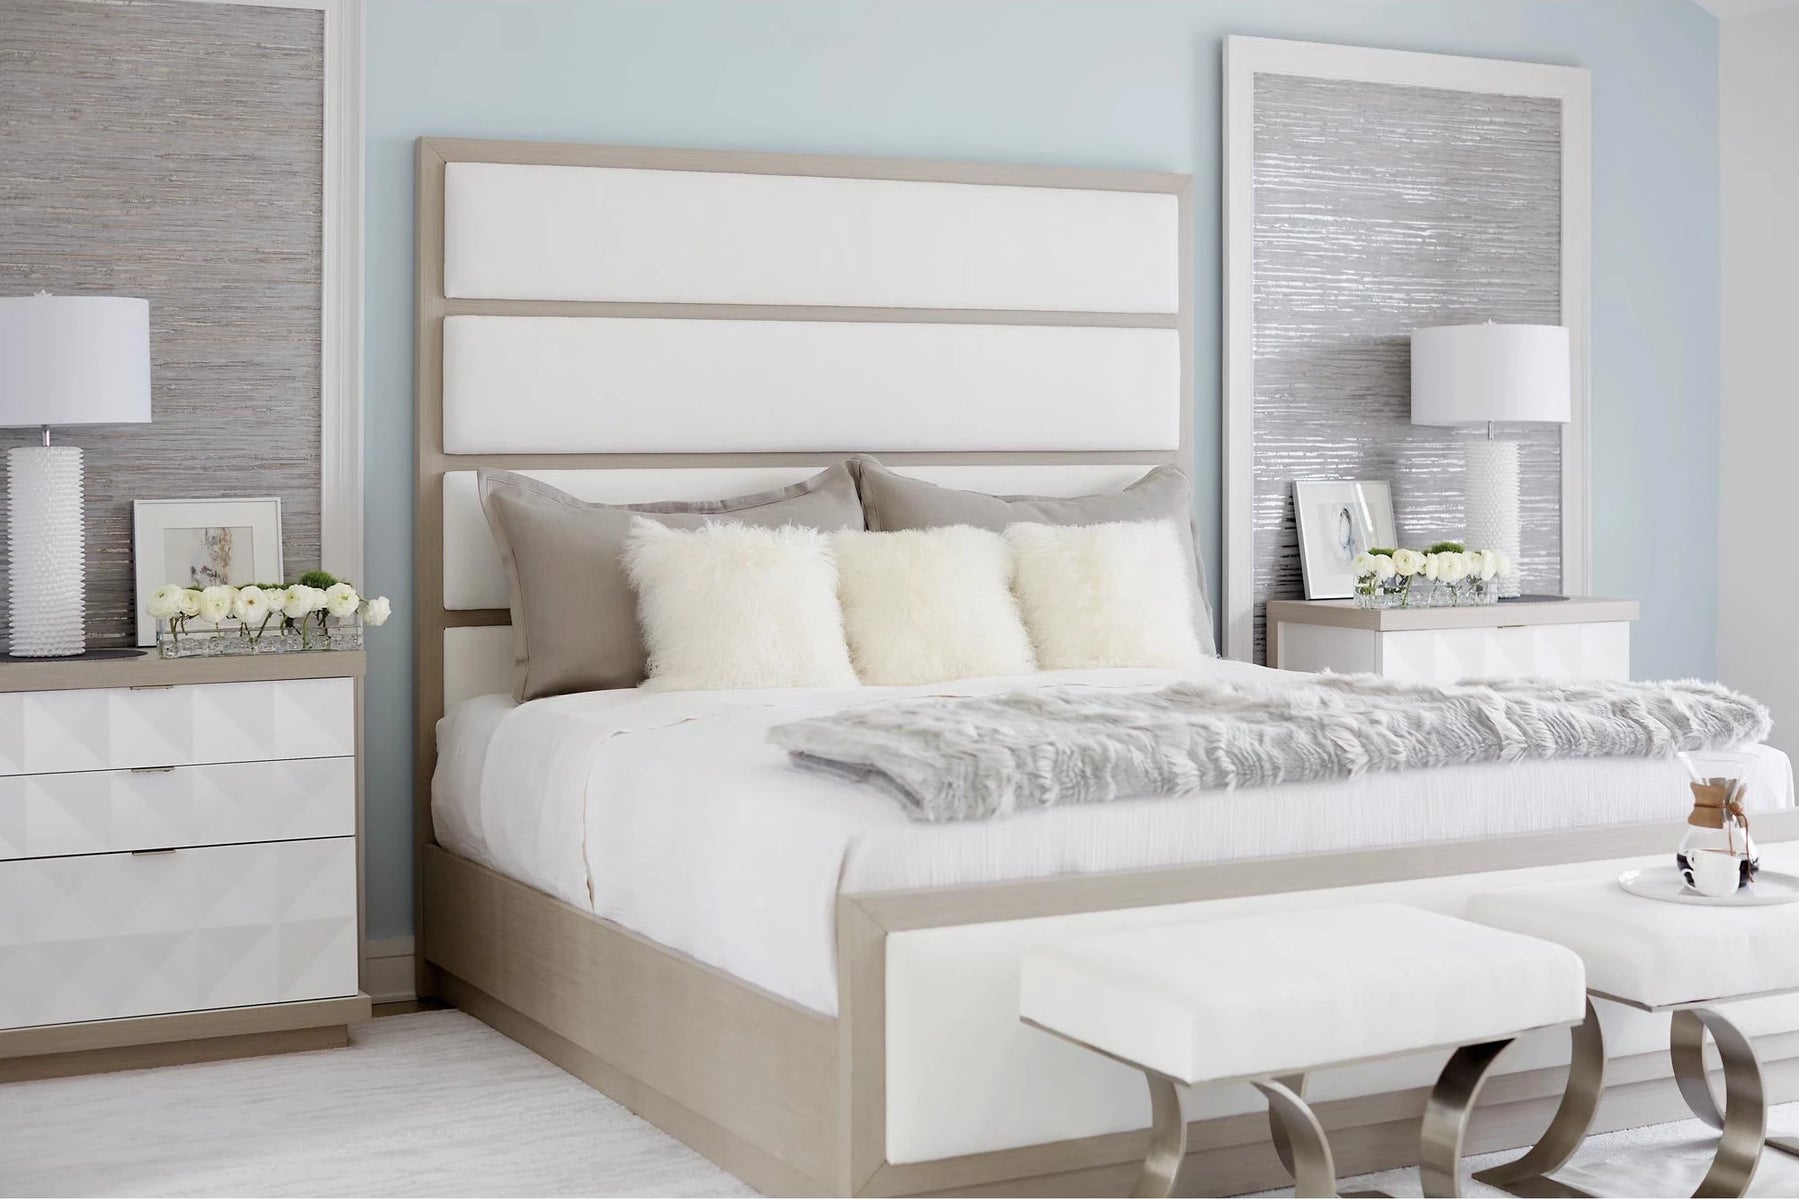 Planning To Design Your Beautiful Bedroom? Don't Miss These Tips